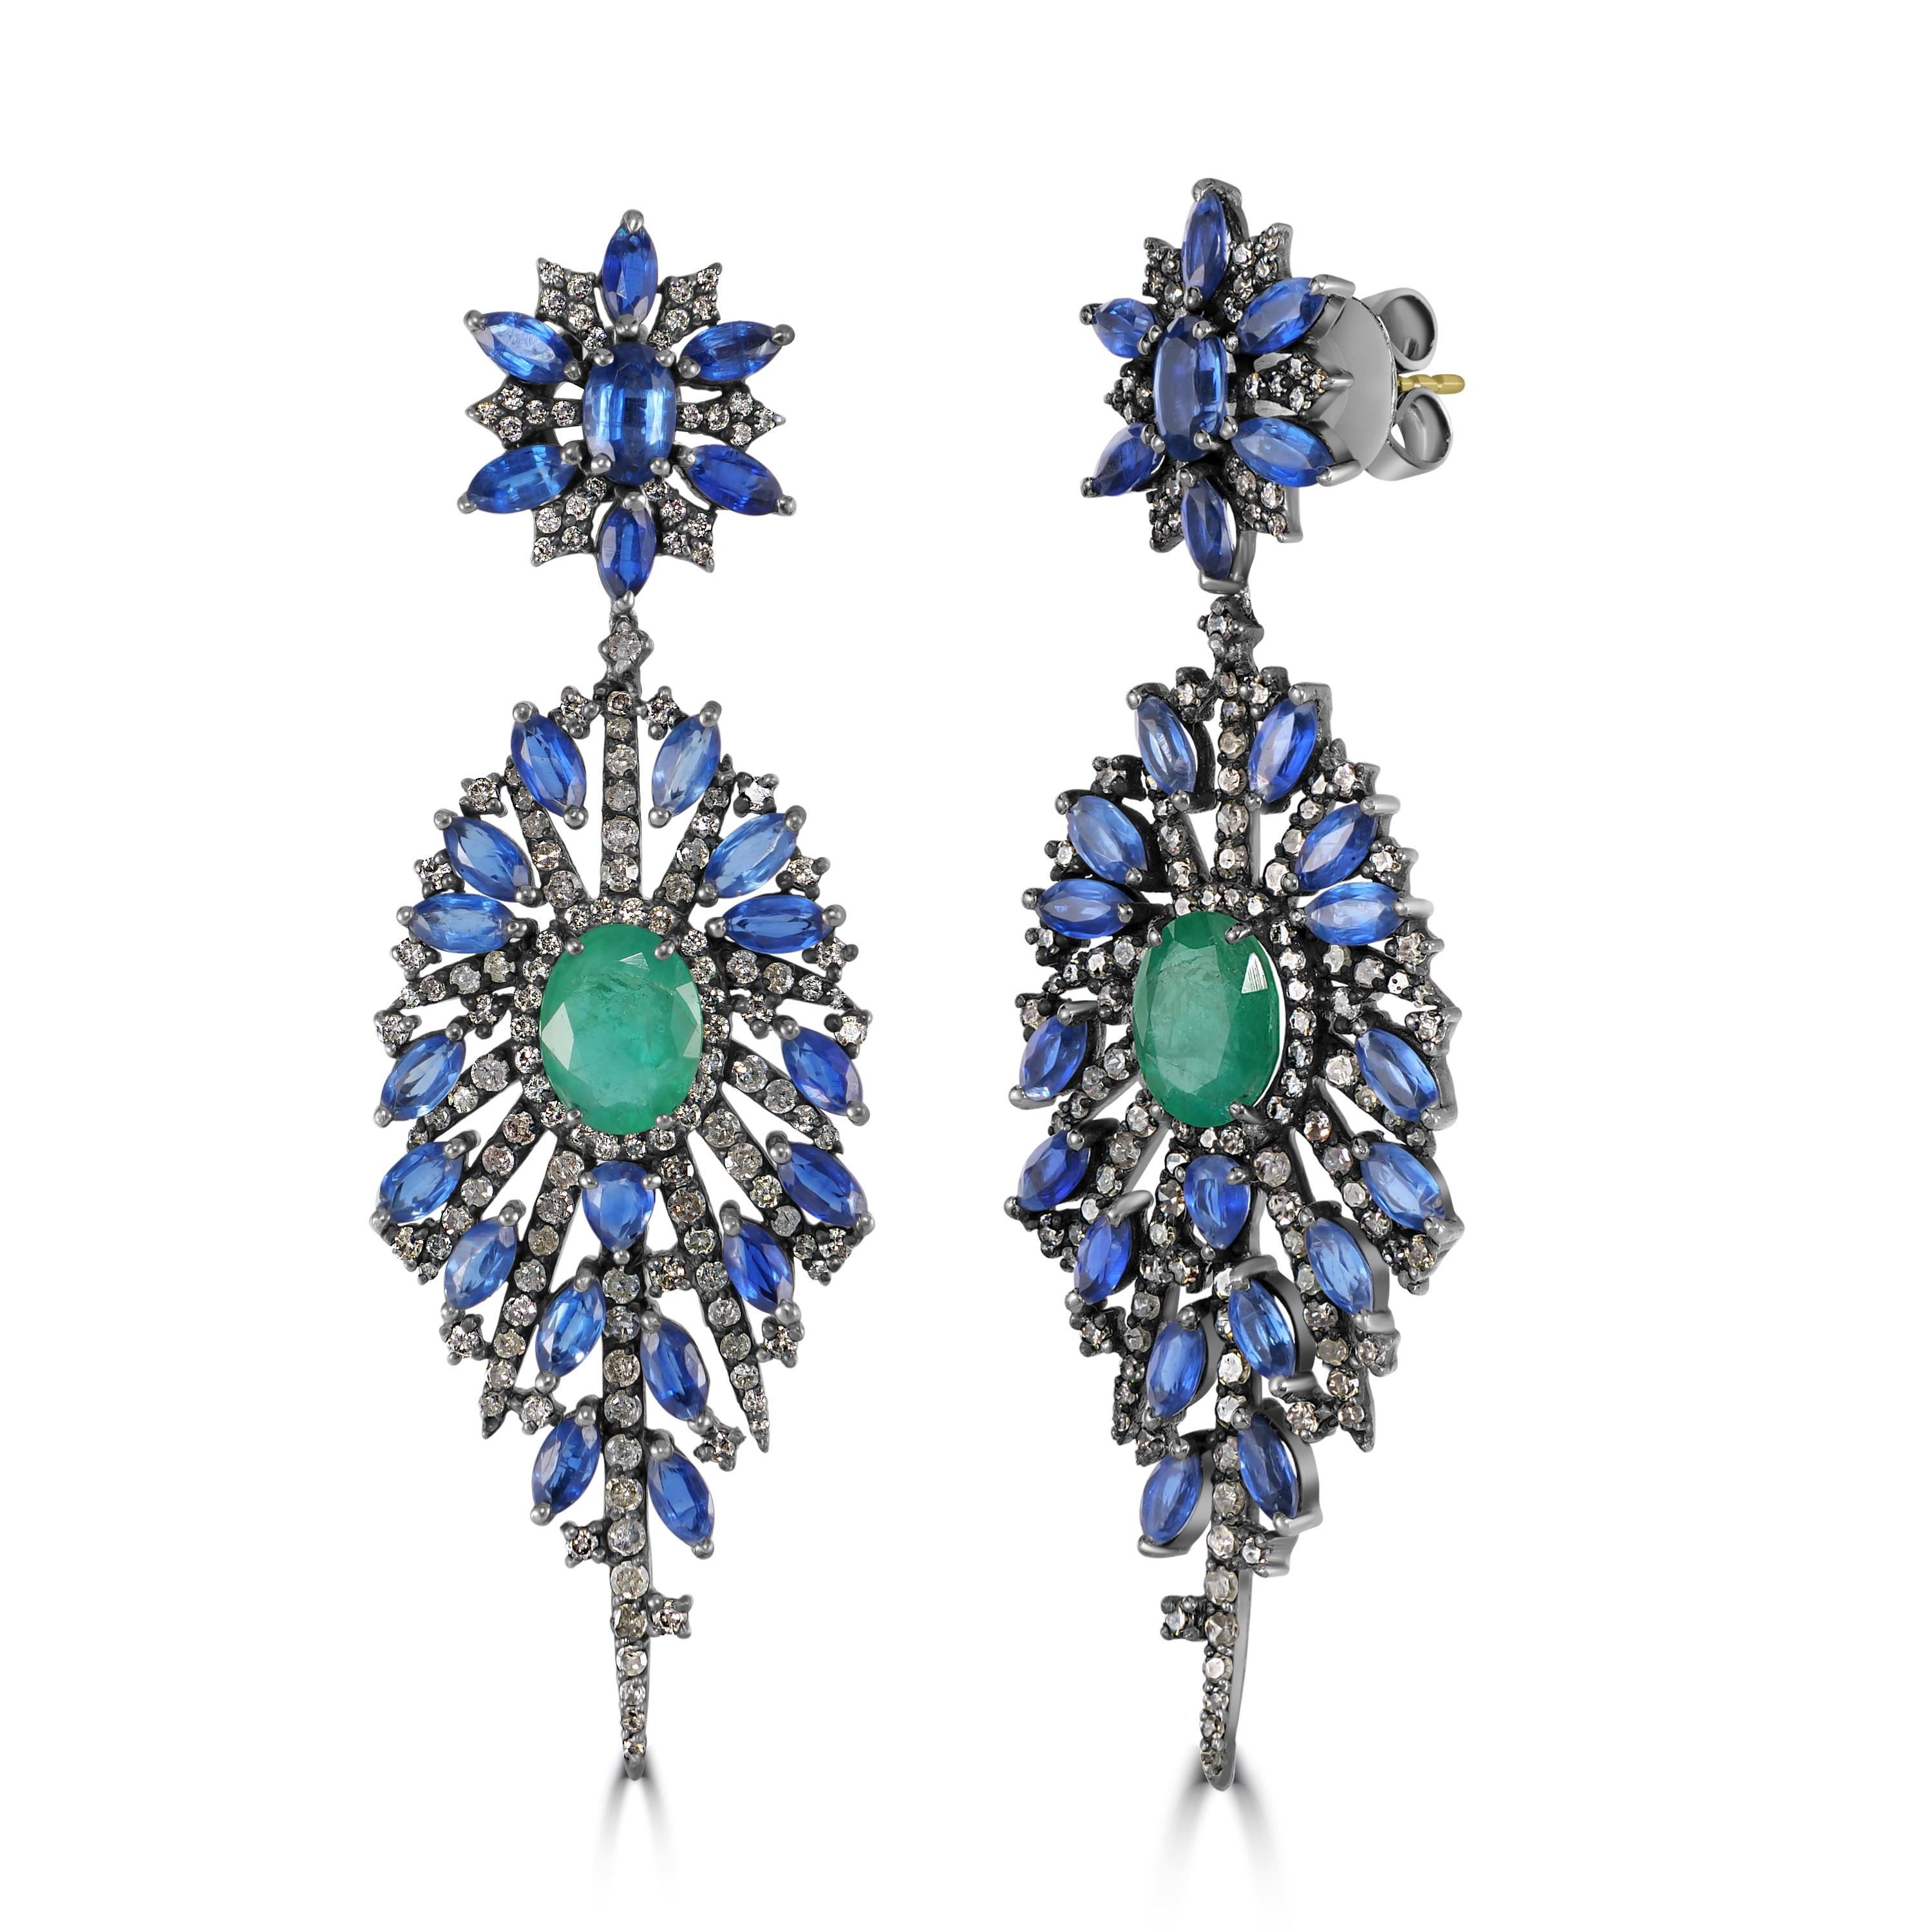 Indulge in the enchanting beauty of our Victorian Emerald, Kyanite, and Diamond Floral Dangle Earrings, a masterpiece of timeless elegance and sophistication.

These exquisite earrings feature a floral-inspired surmount adorned with alternating